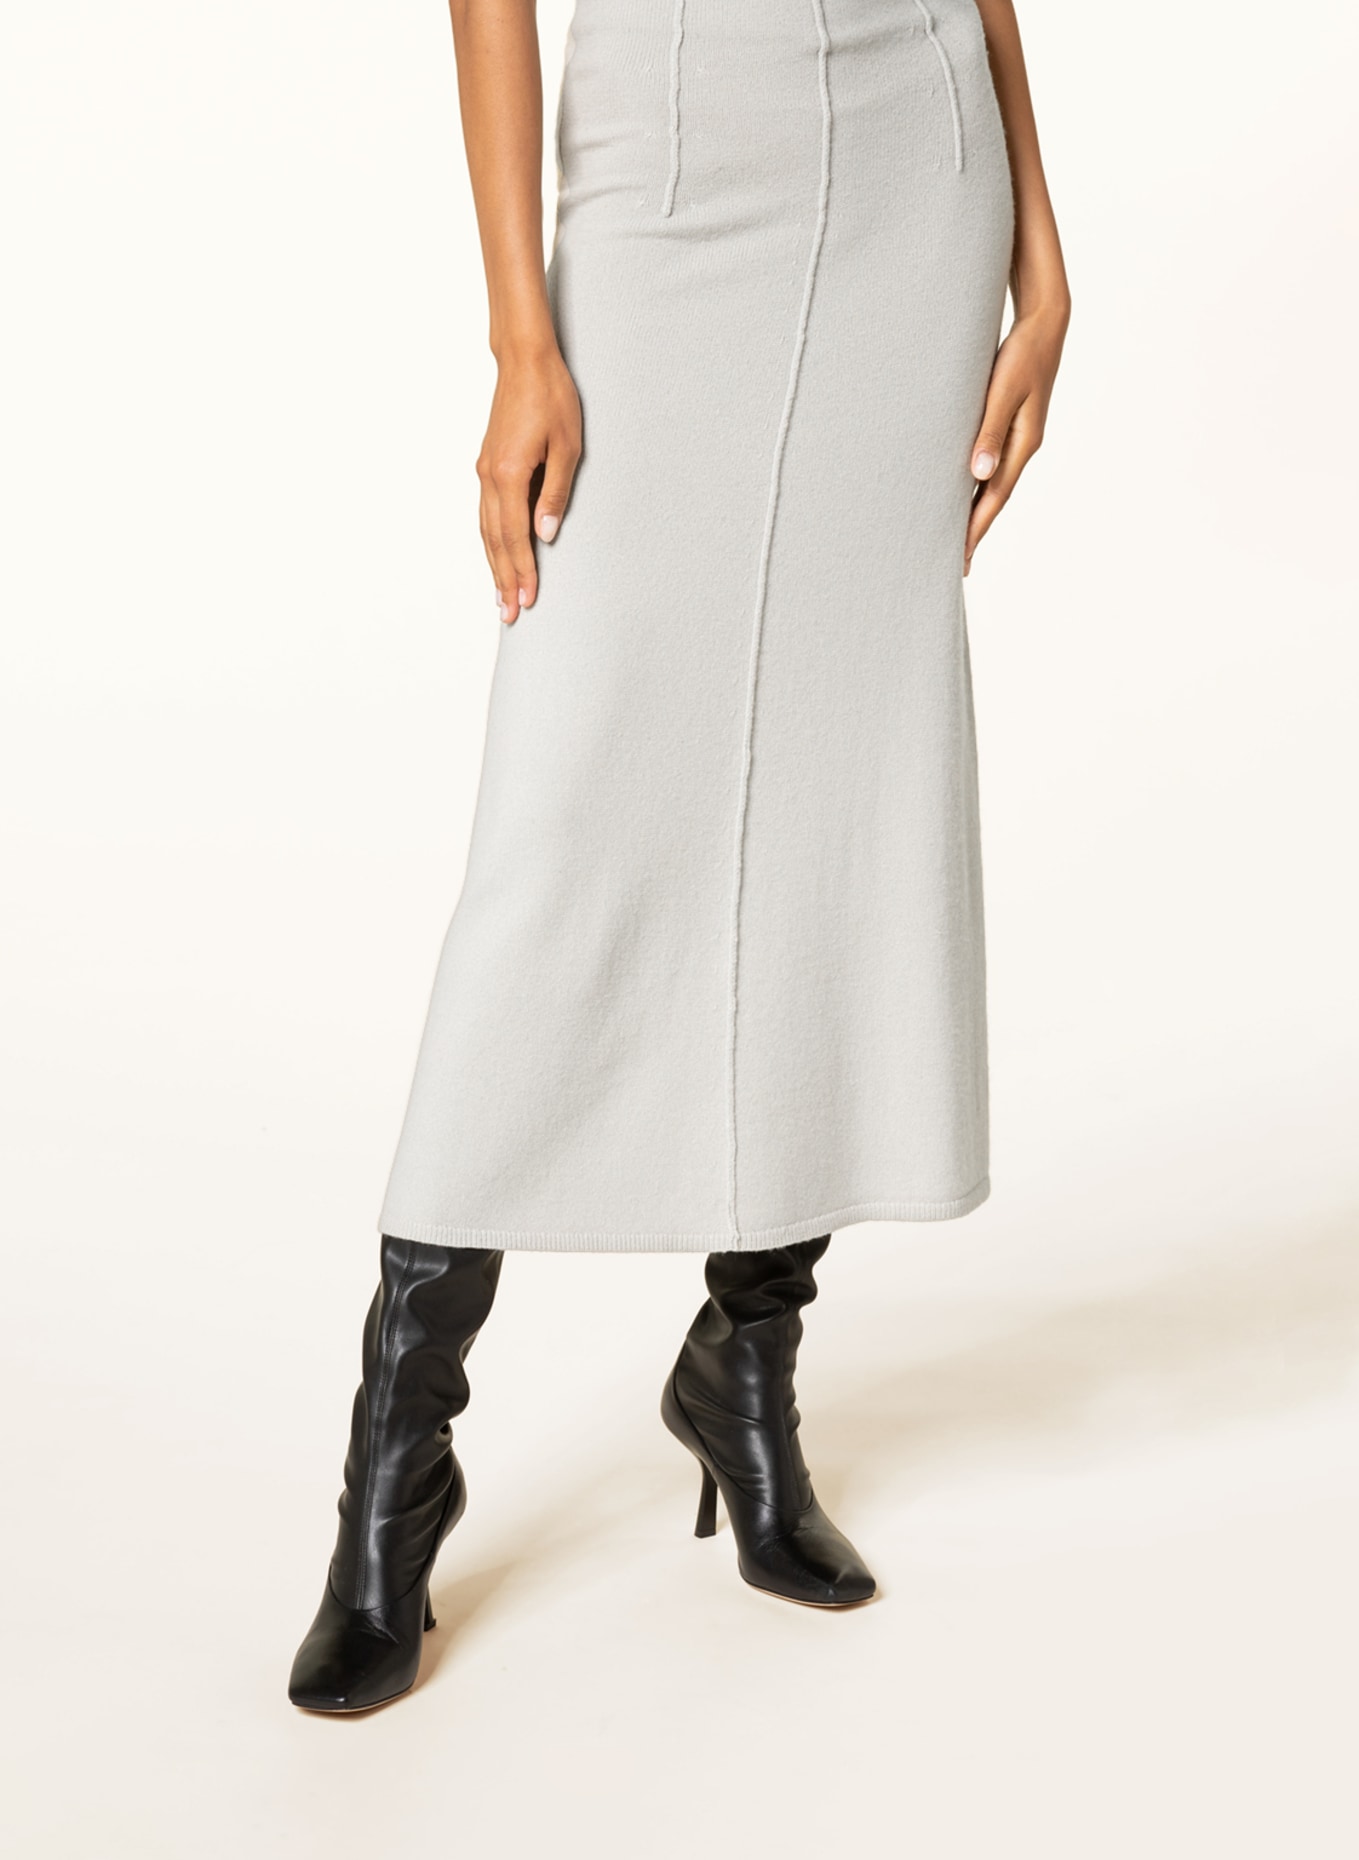 DOROTHEE SCHUMACHER Knit skirt with cashmere , Color: LIGHT GRAY (Image 4)